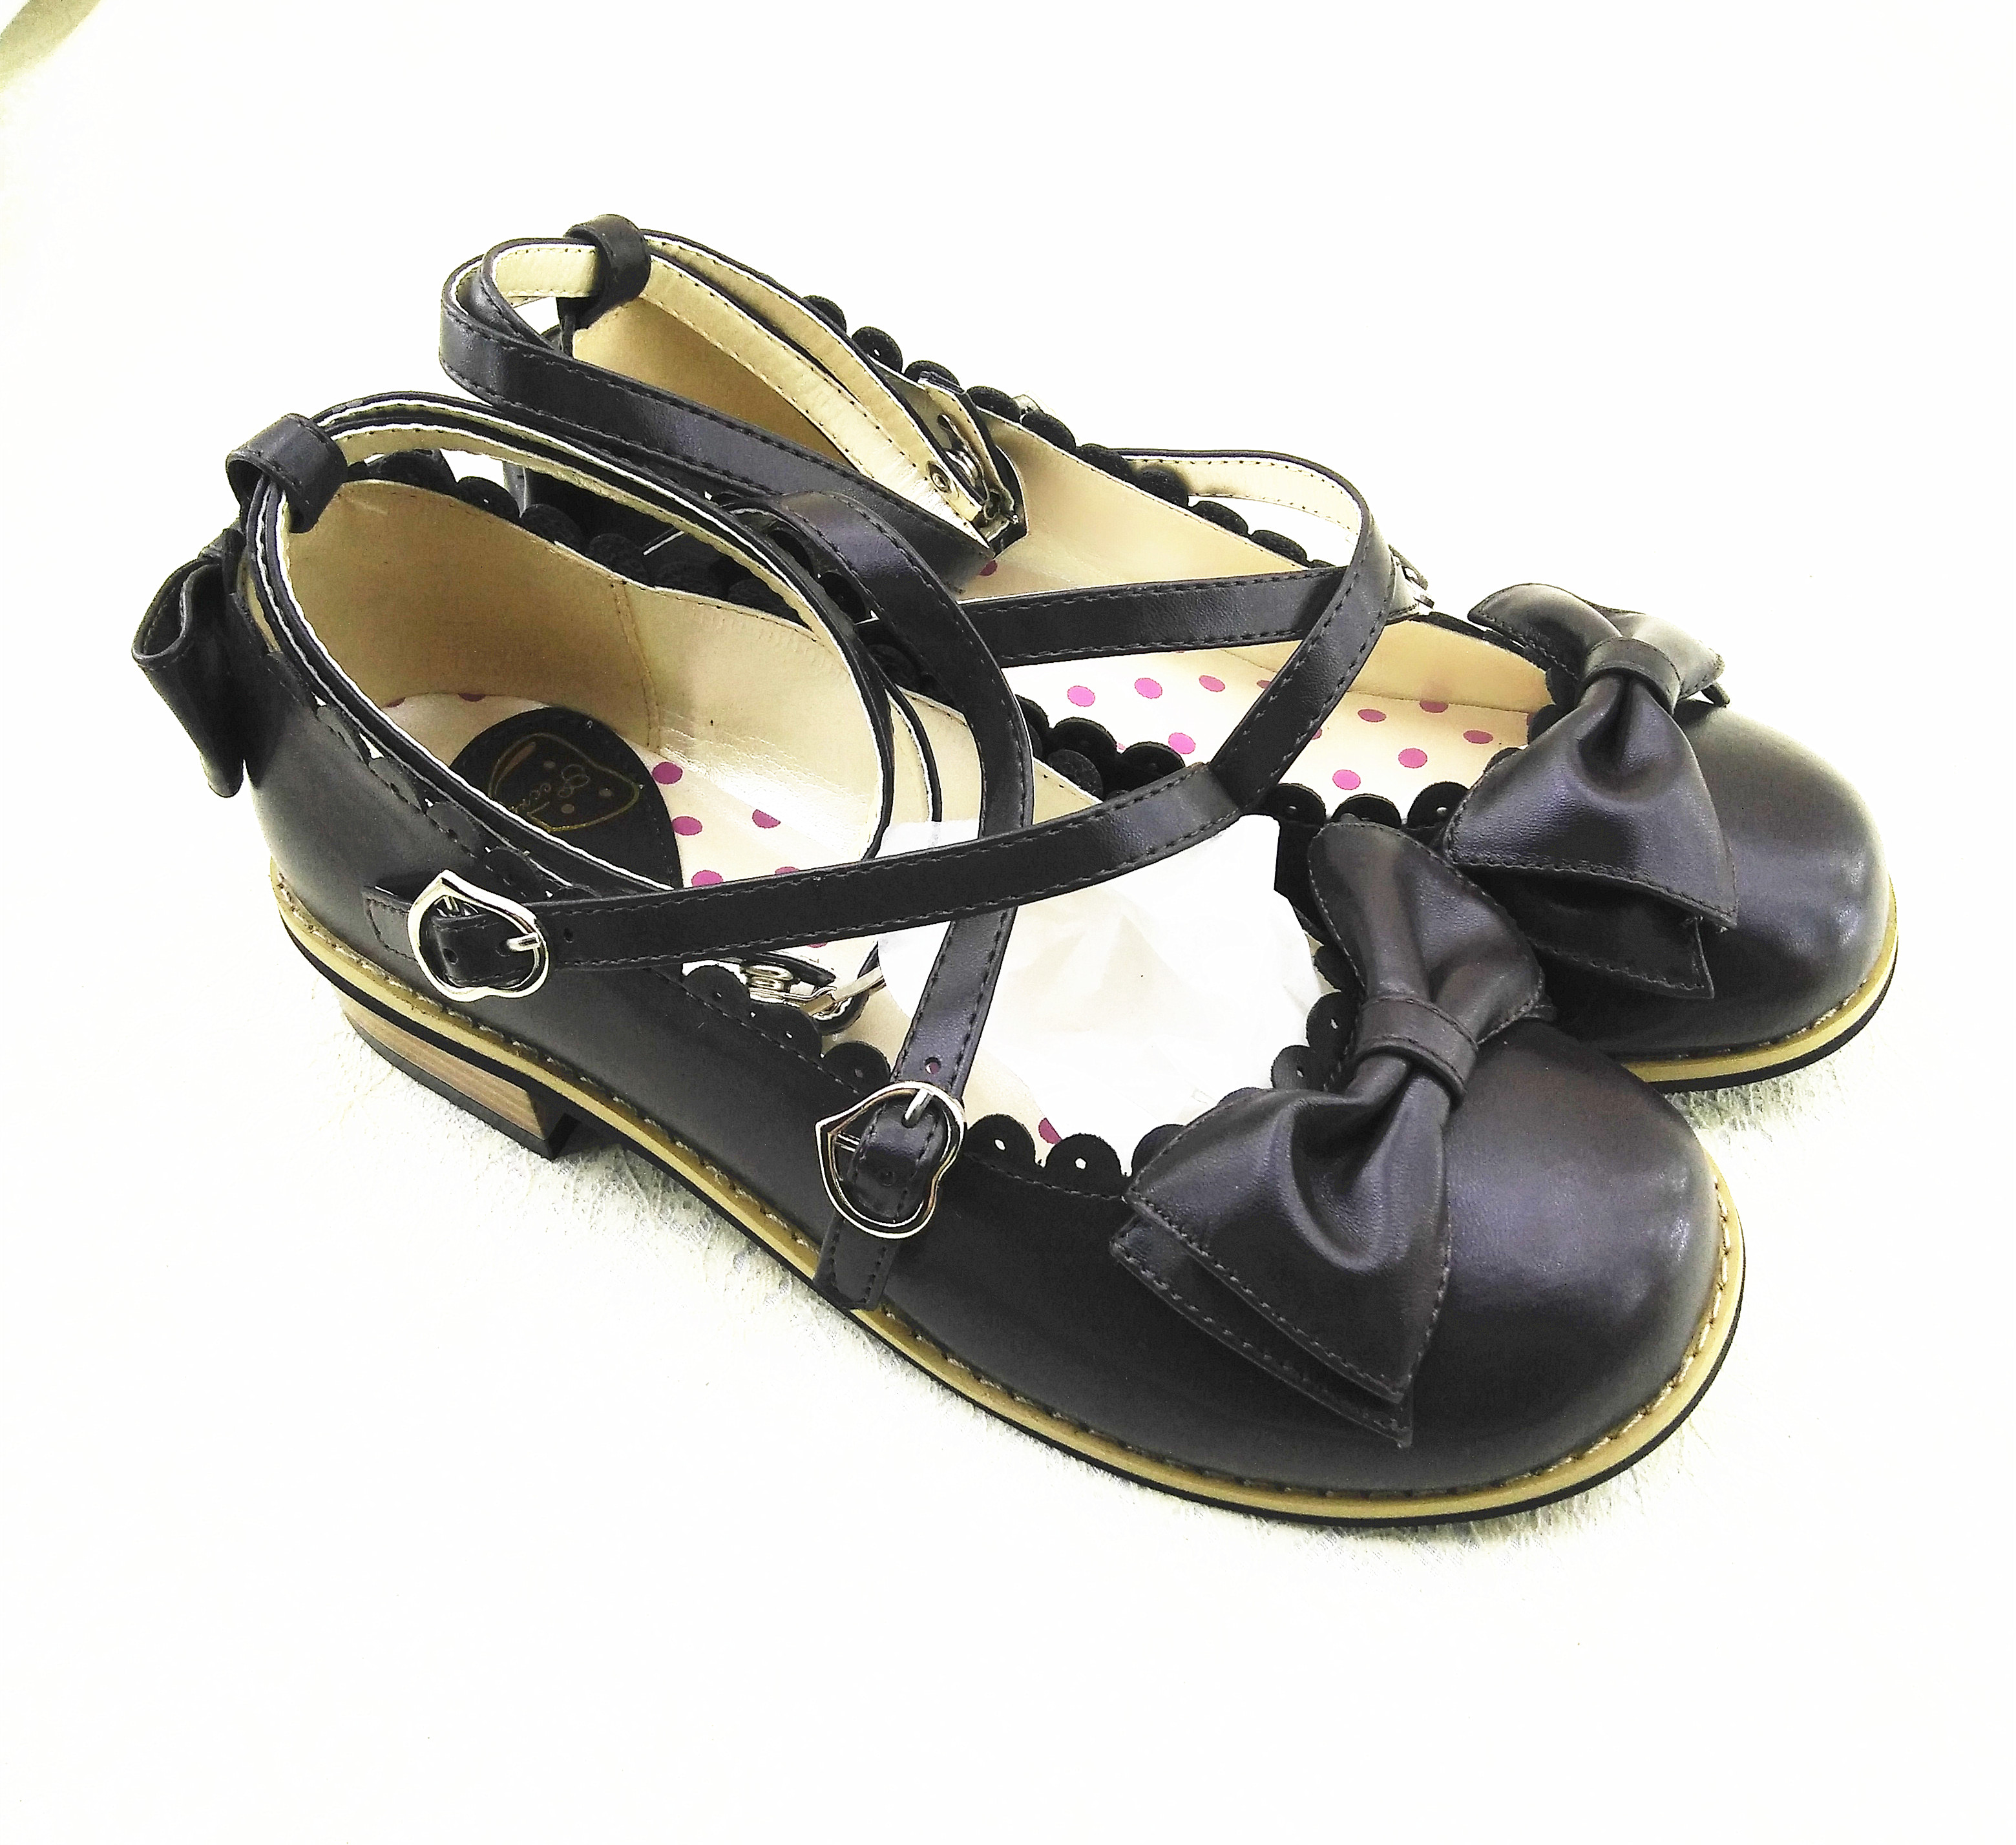 Cross Strap Bow Round Toe Girl Princess Shoes